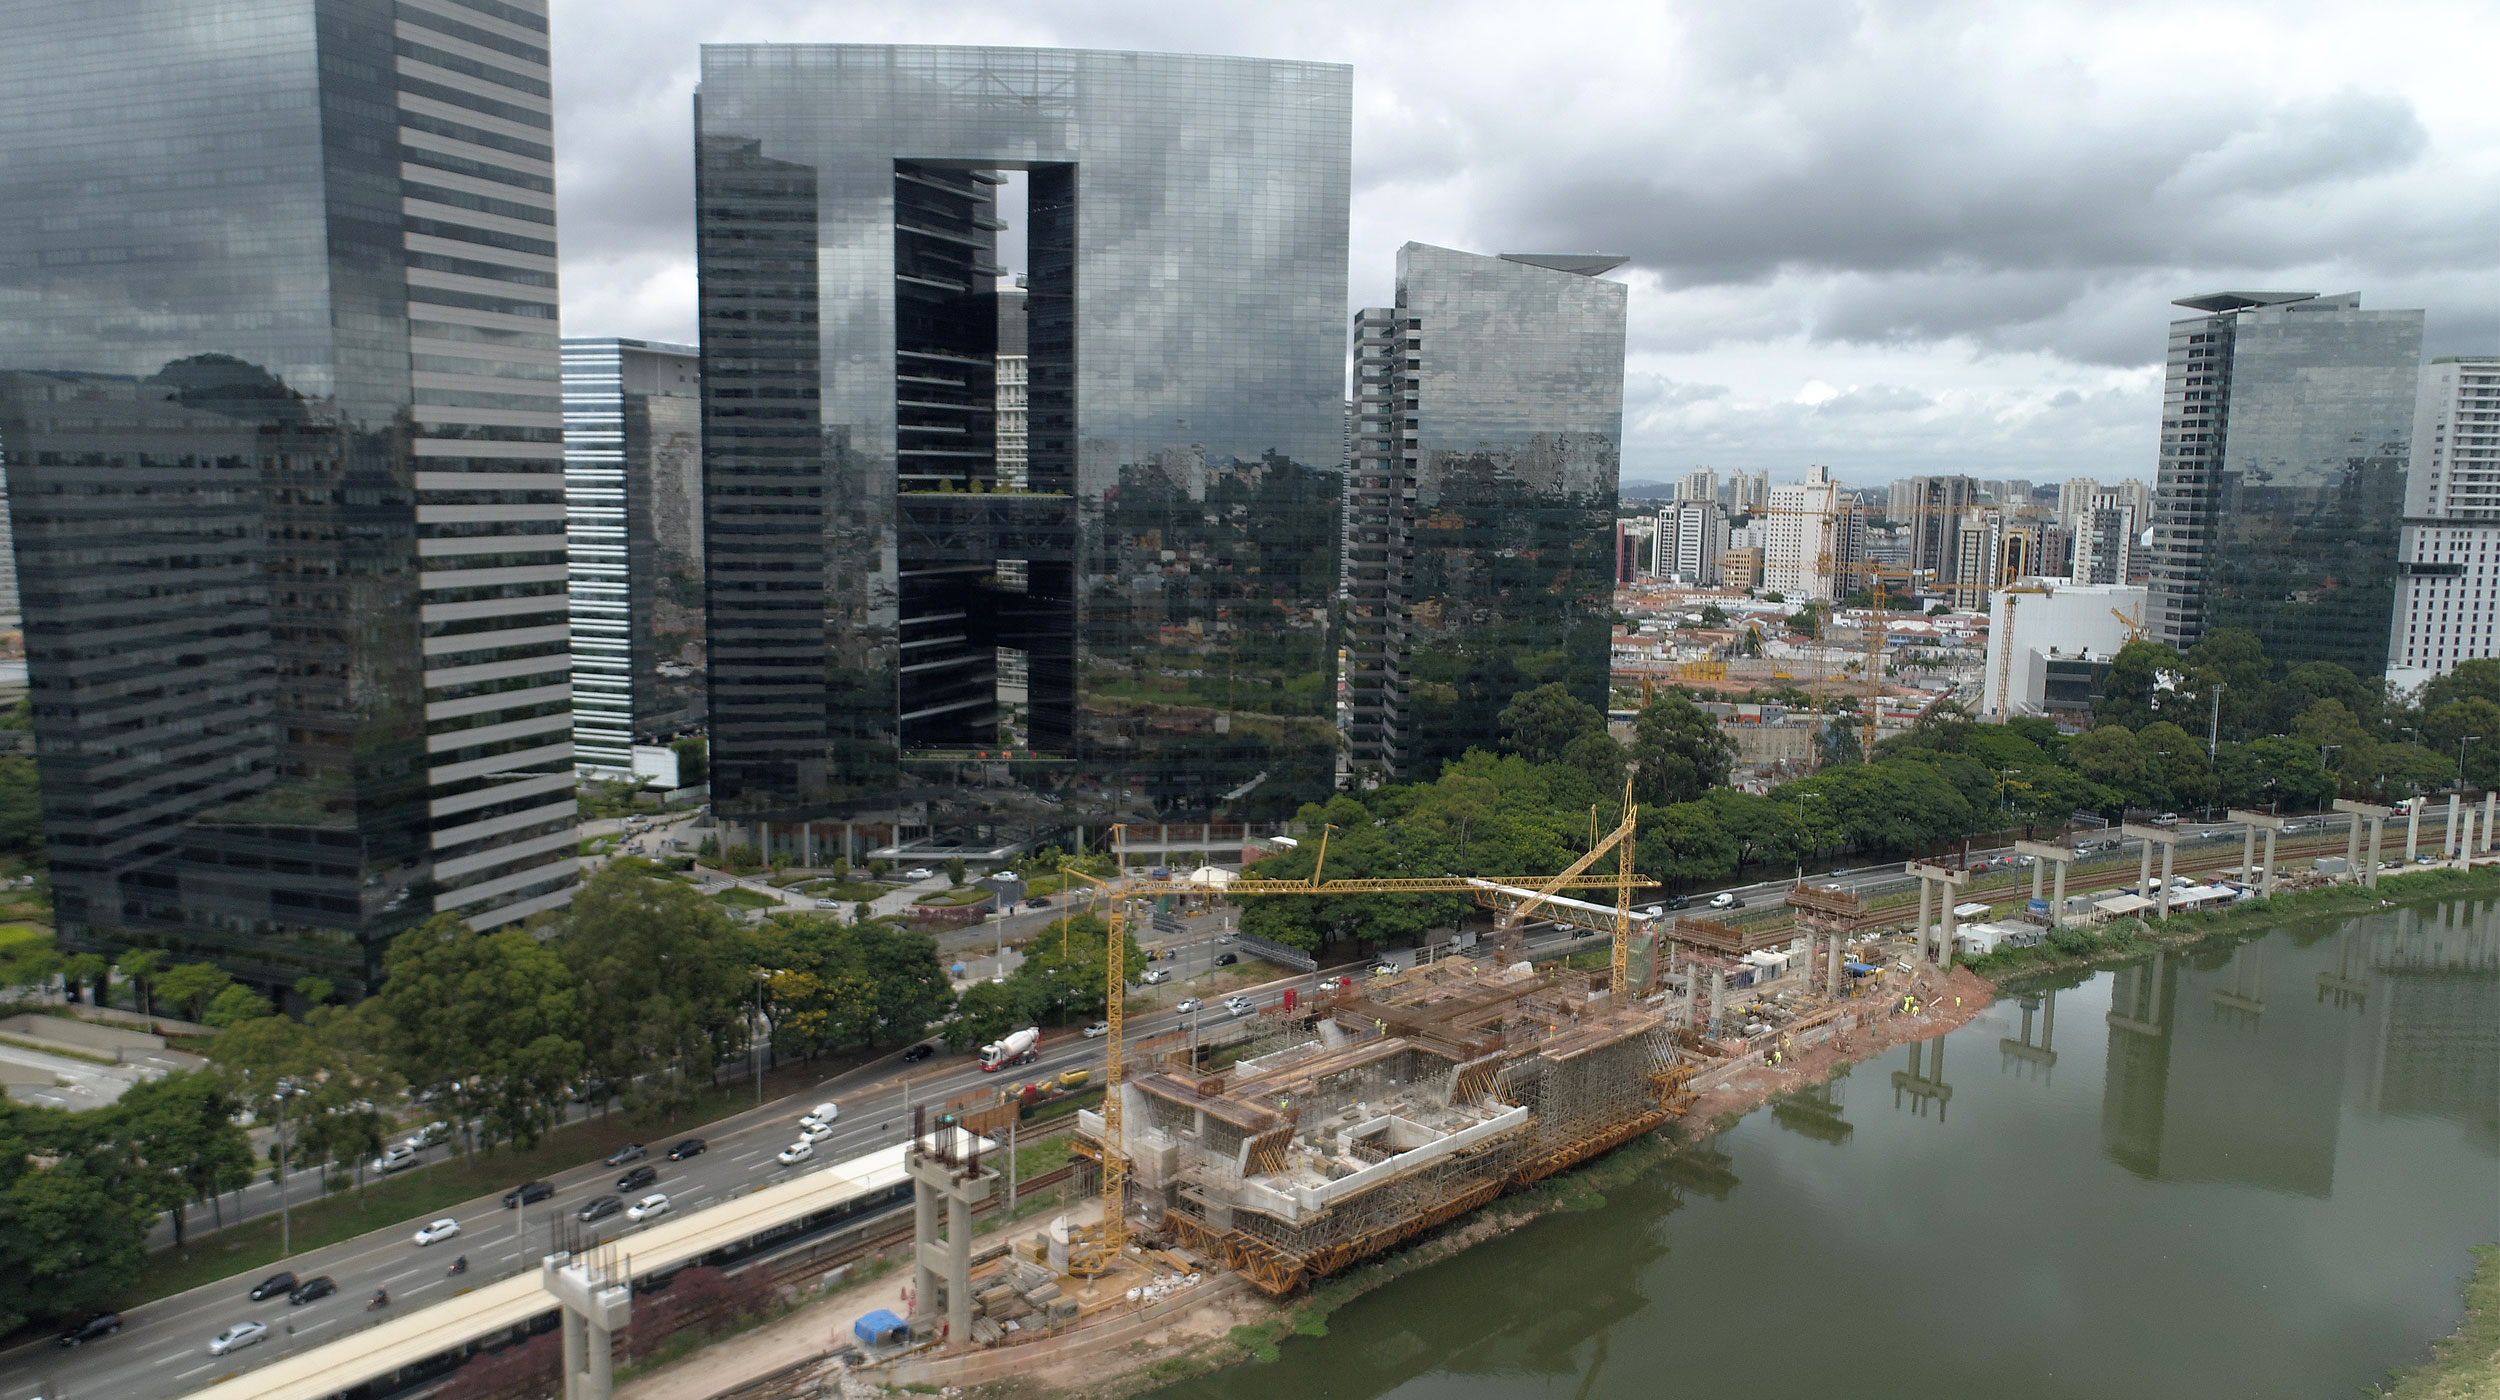 Morumbi station, located in southern São Paulo, will connect the Congonhas Airport to the Morumbi District of São Paulo. It is one of the city's great urban mobility projects.